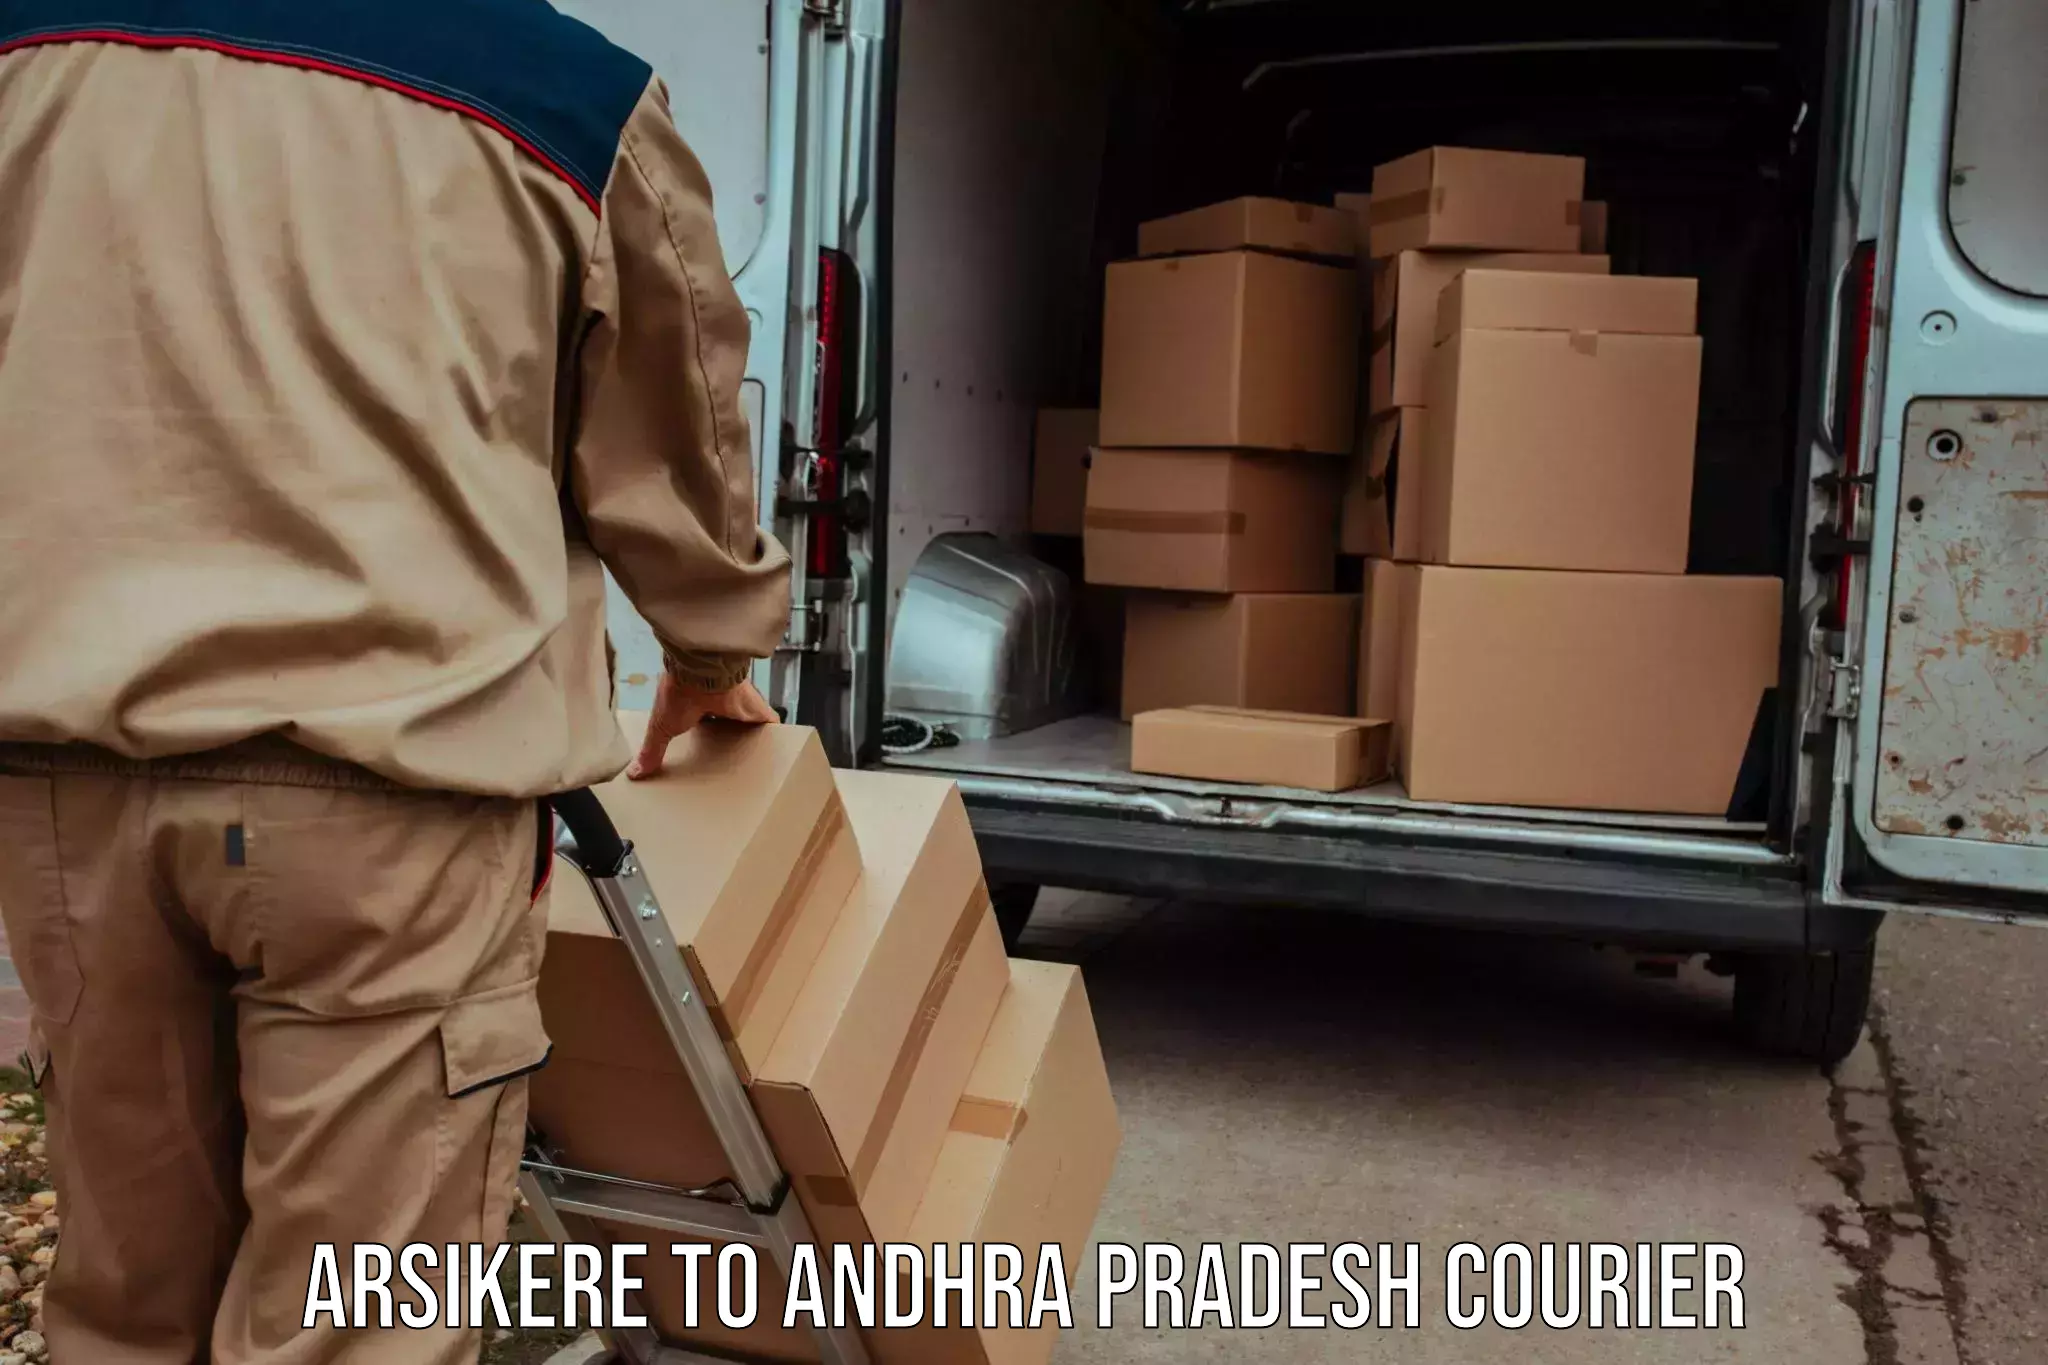 Courier service partnerships Arsikere to Ponnur